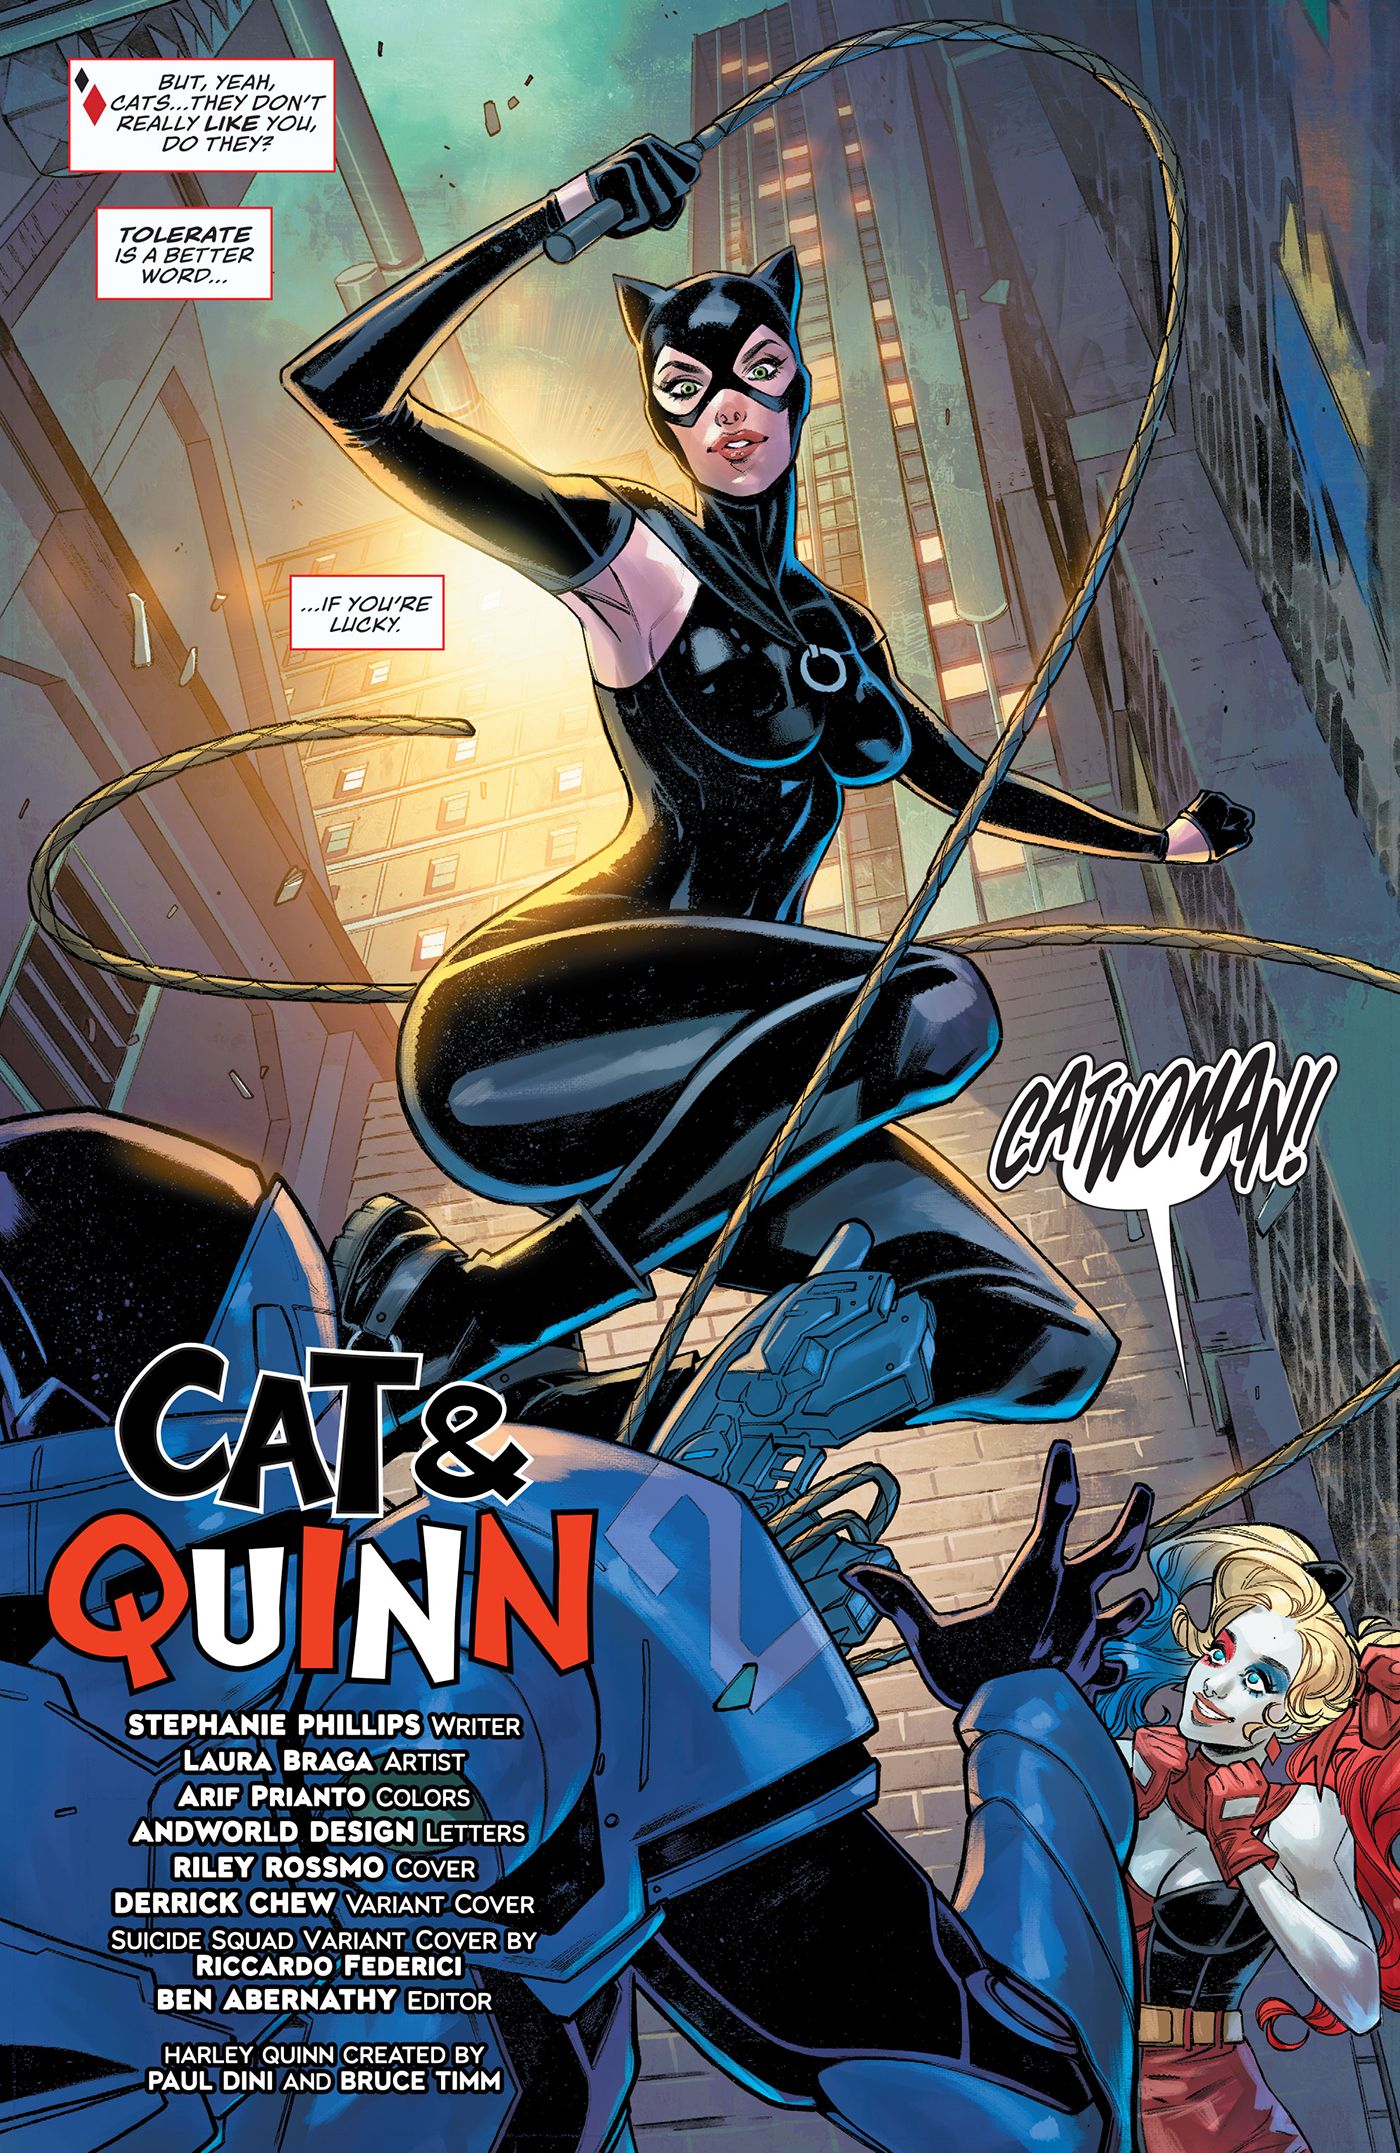 Catwoman comes to Harley Quinn's rescue.